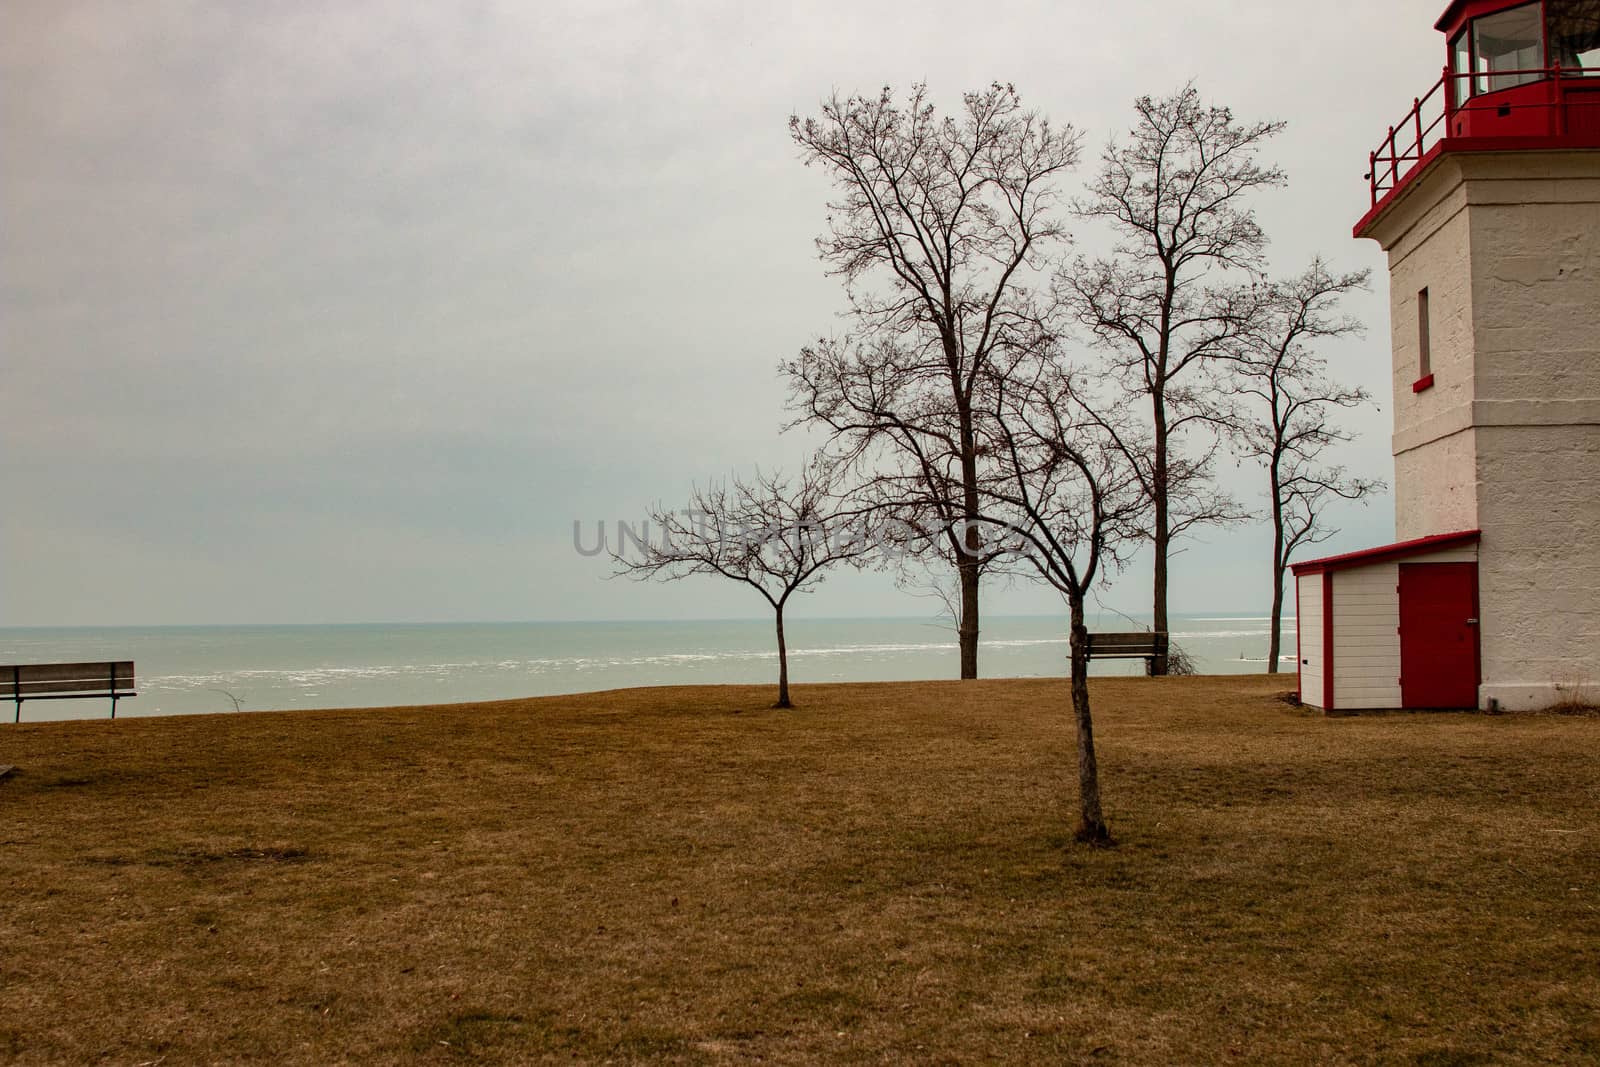 Goderich Ontario Canada lighthouse panoramic style photo. Goderich is popular for tourism.